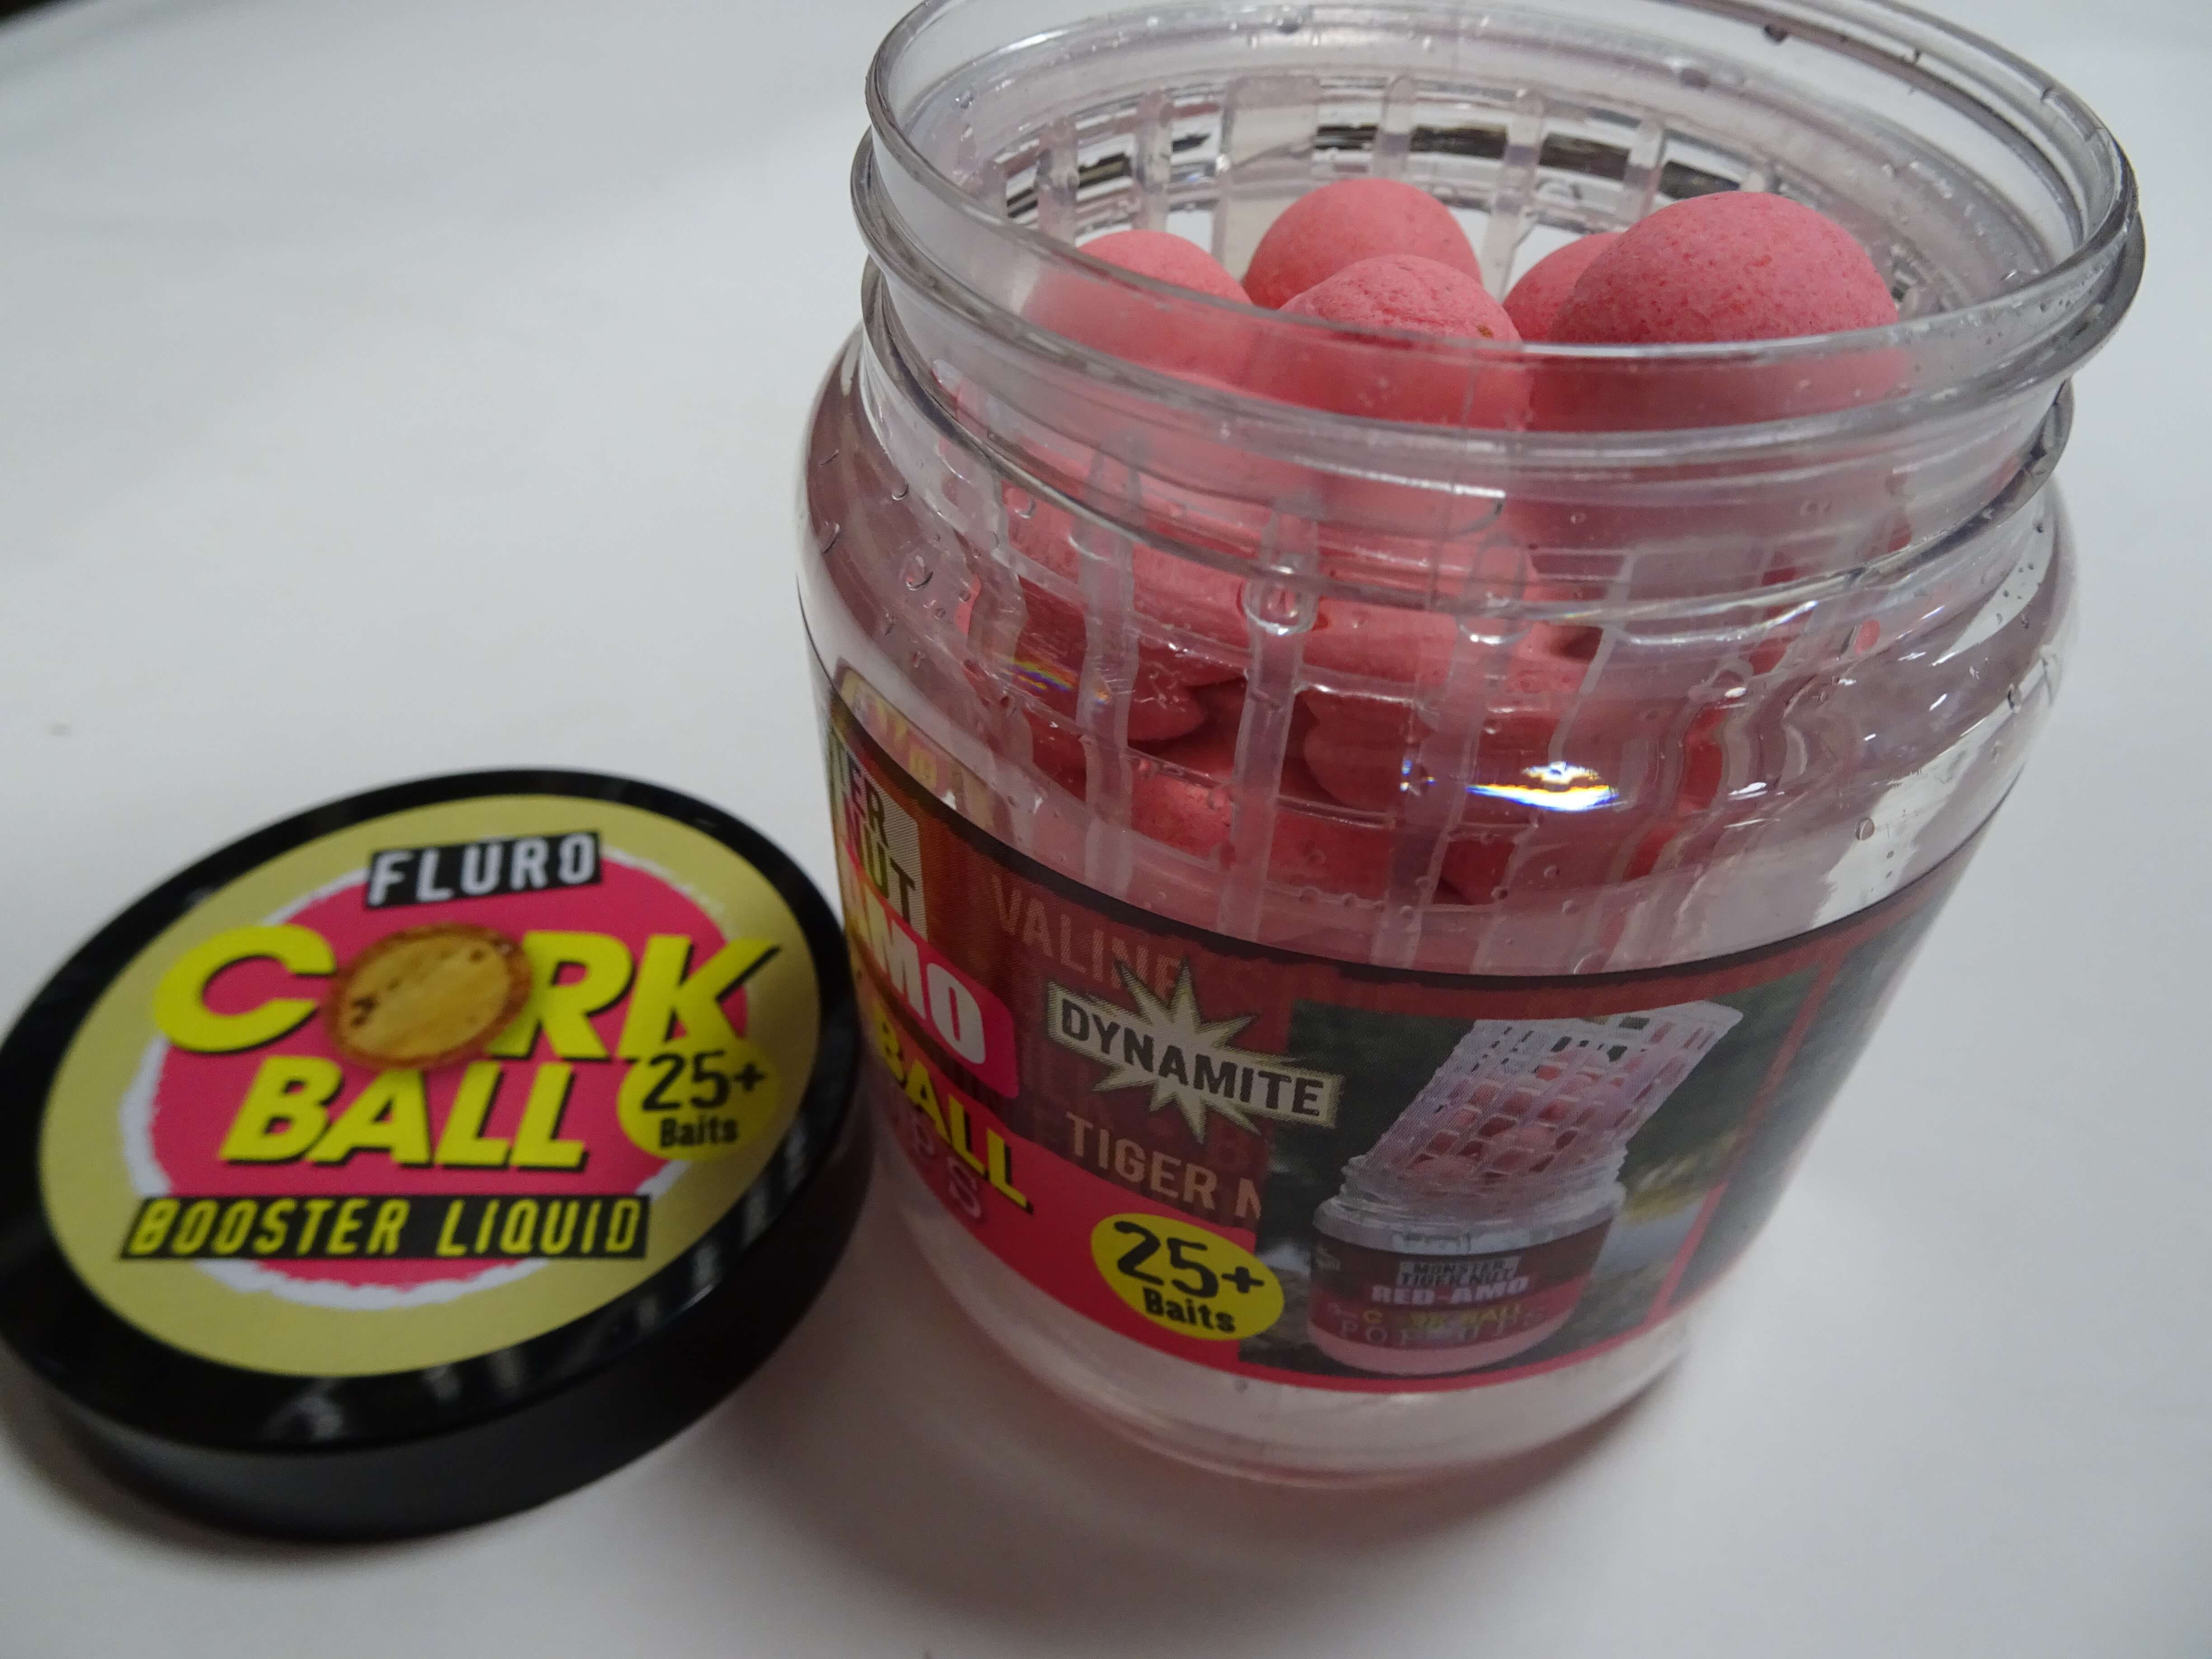 Dynamite Baits The Crave Fluro Pink 15mm Corkball Pop Ups Fishing tackle 